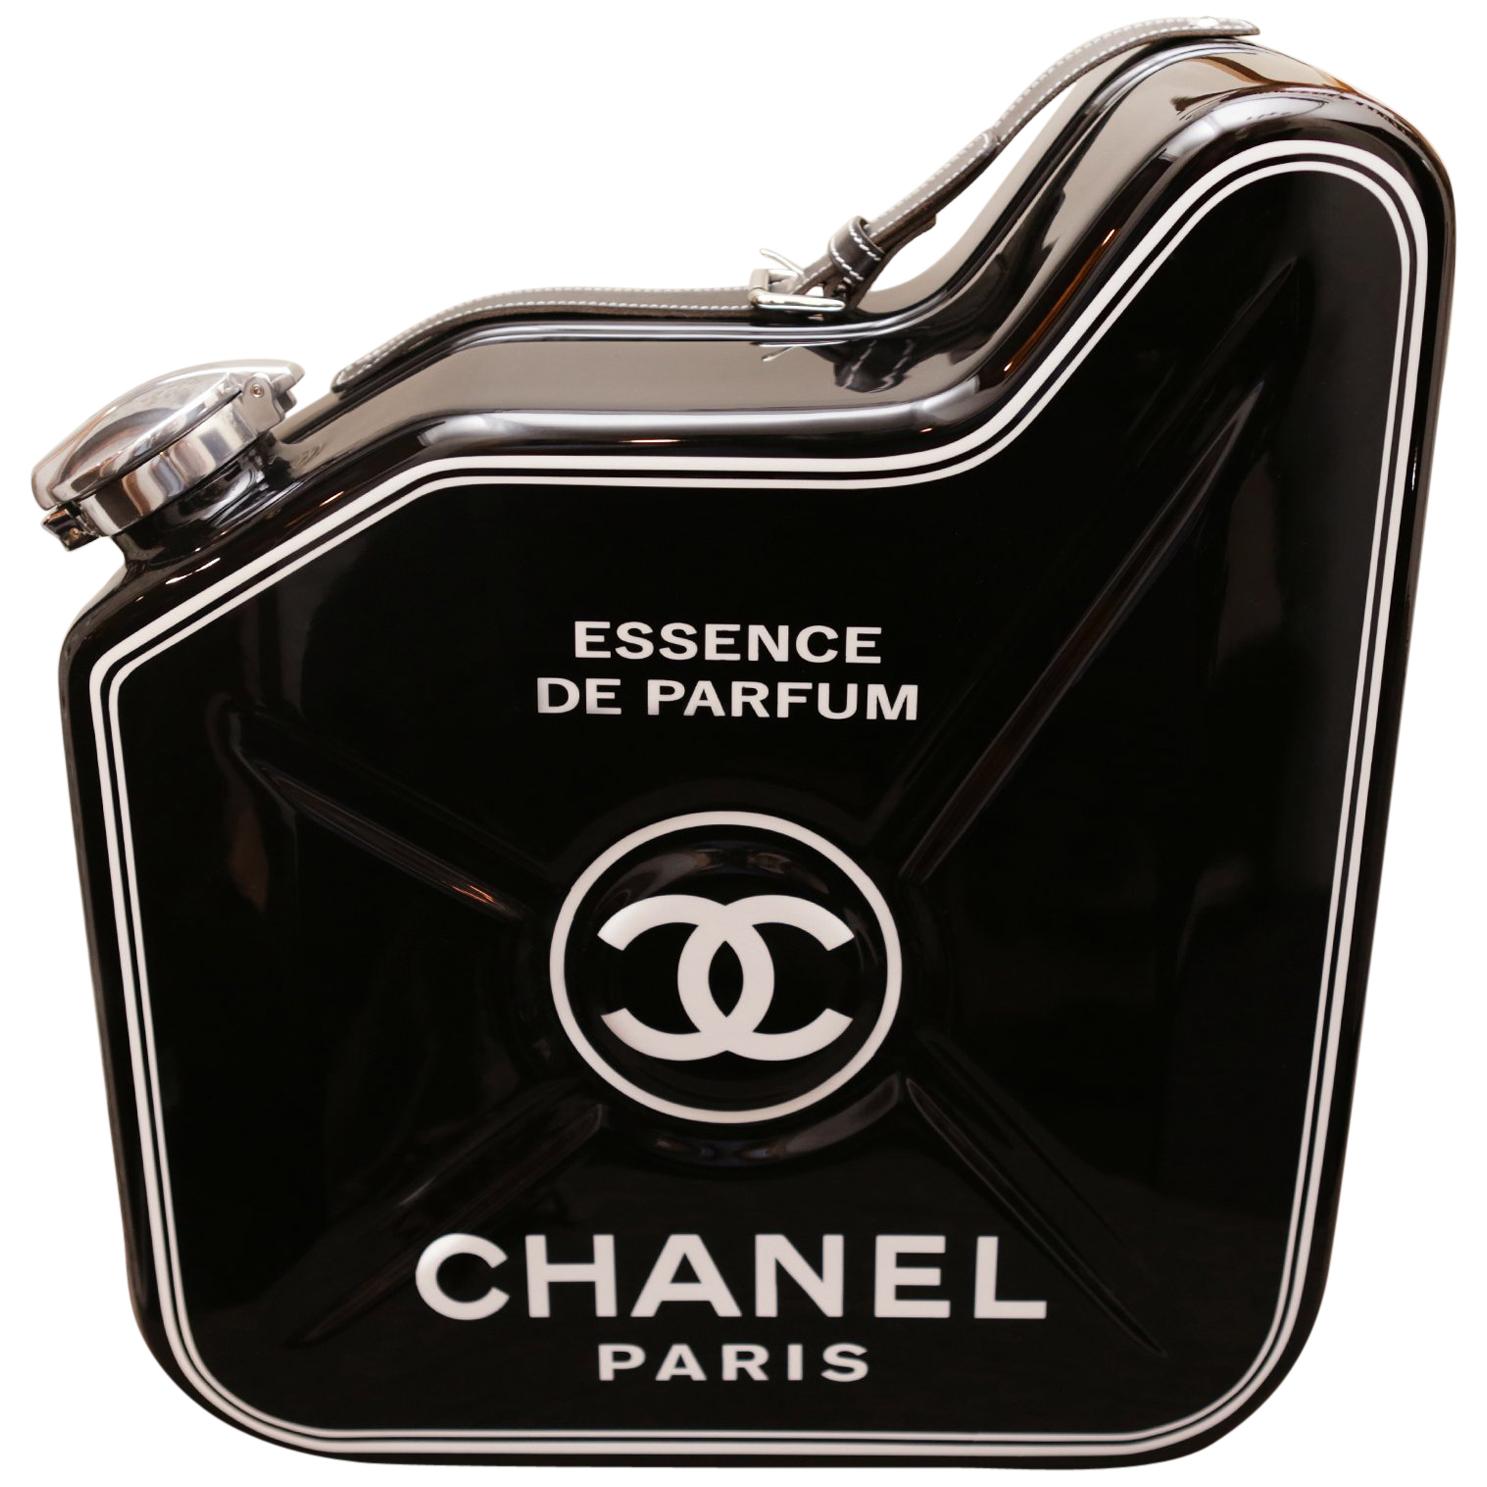 Jerrican Chanel N°5 Black Art Piece in Limited Edition